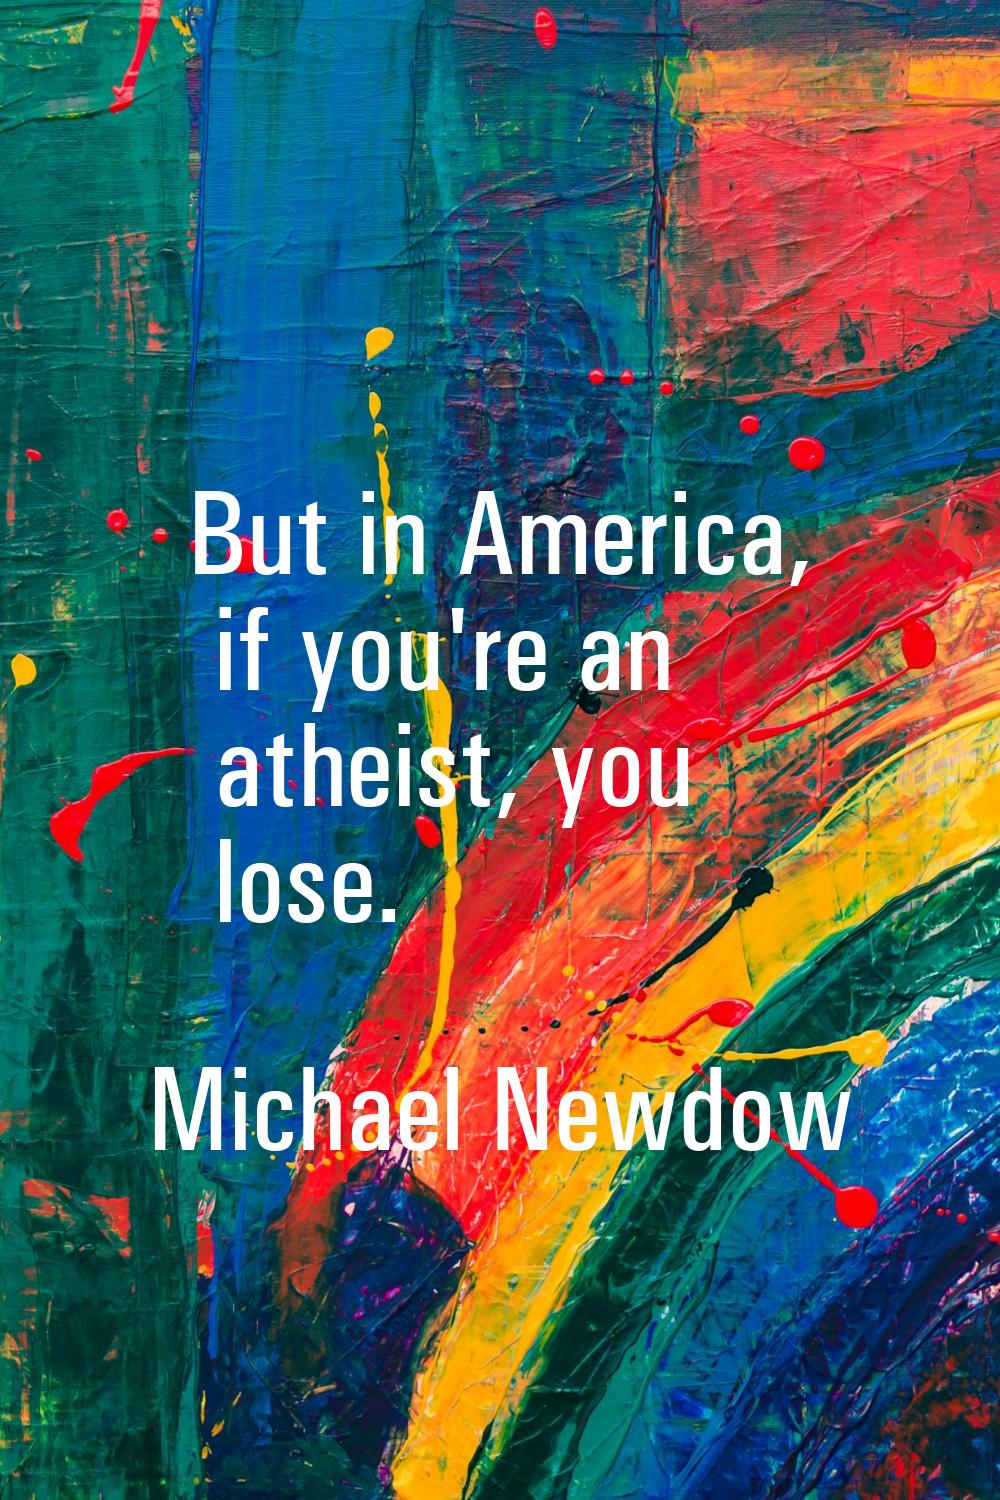 But in America, if you're an atheist, you lose.